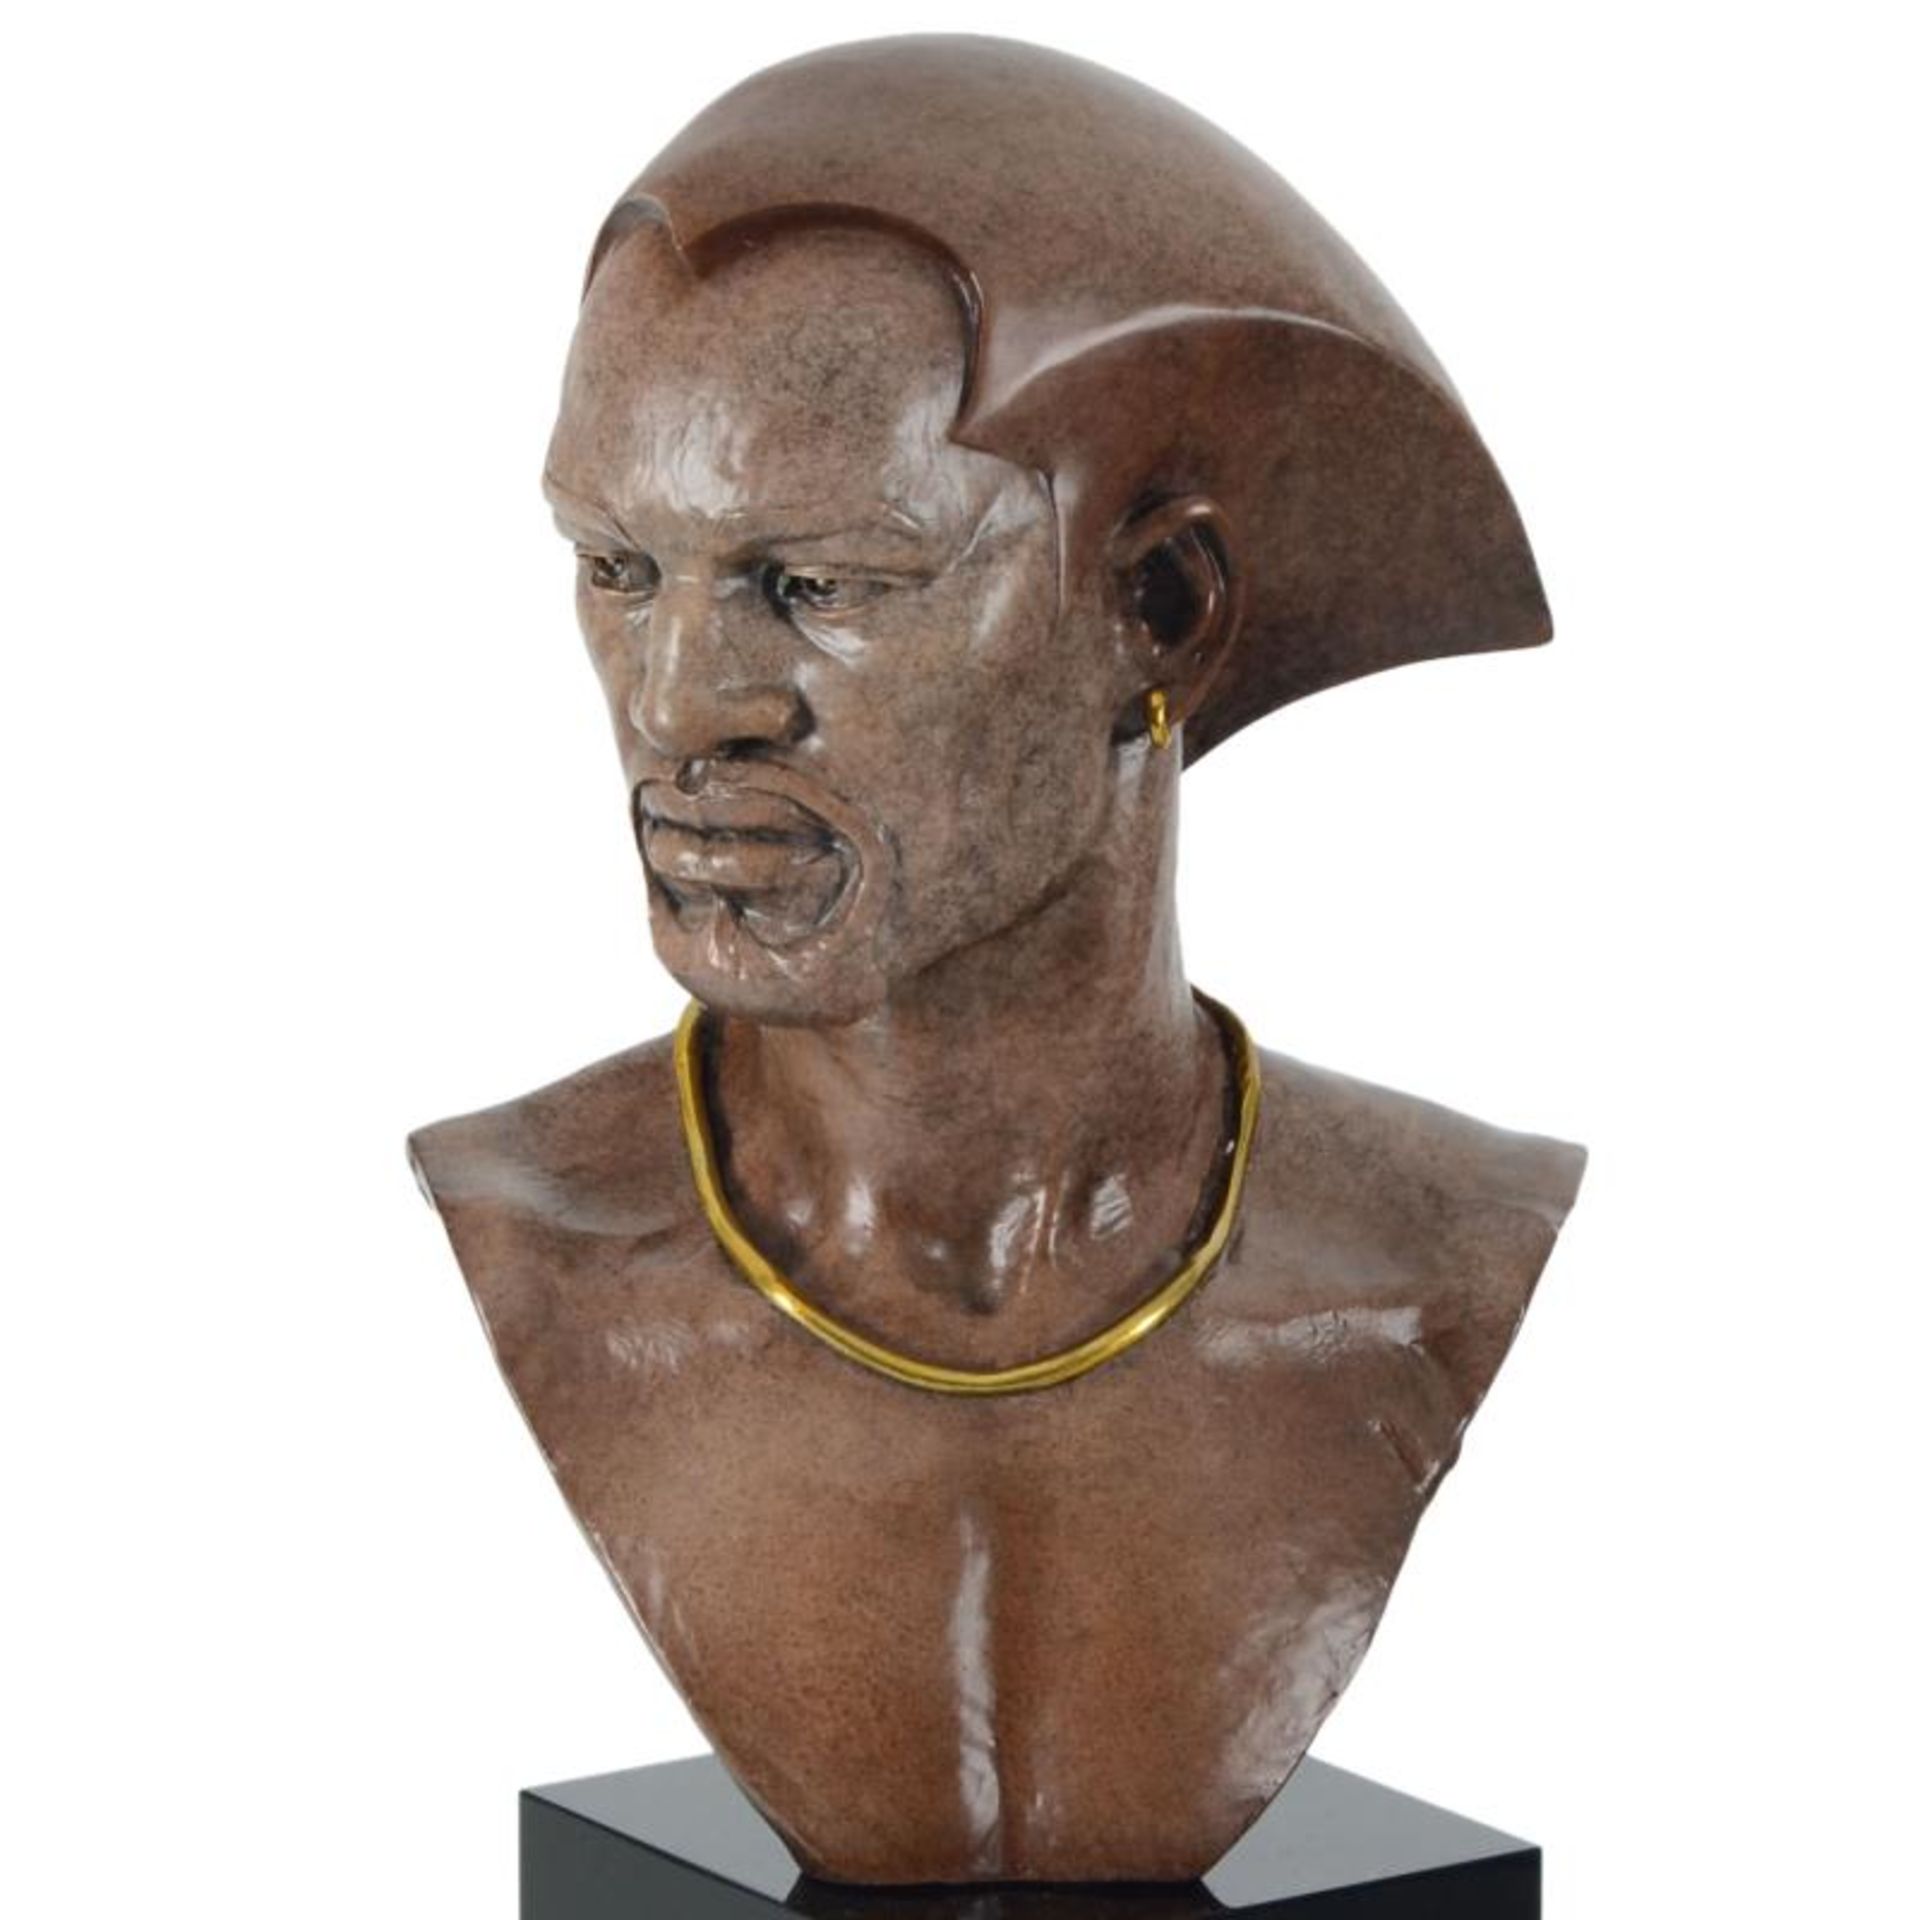 Thomas Blackshear, "Remembering" Limited Edition Mixed Media Sculpture on Marble - Image 2 of 3